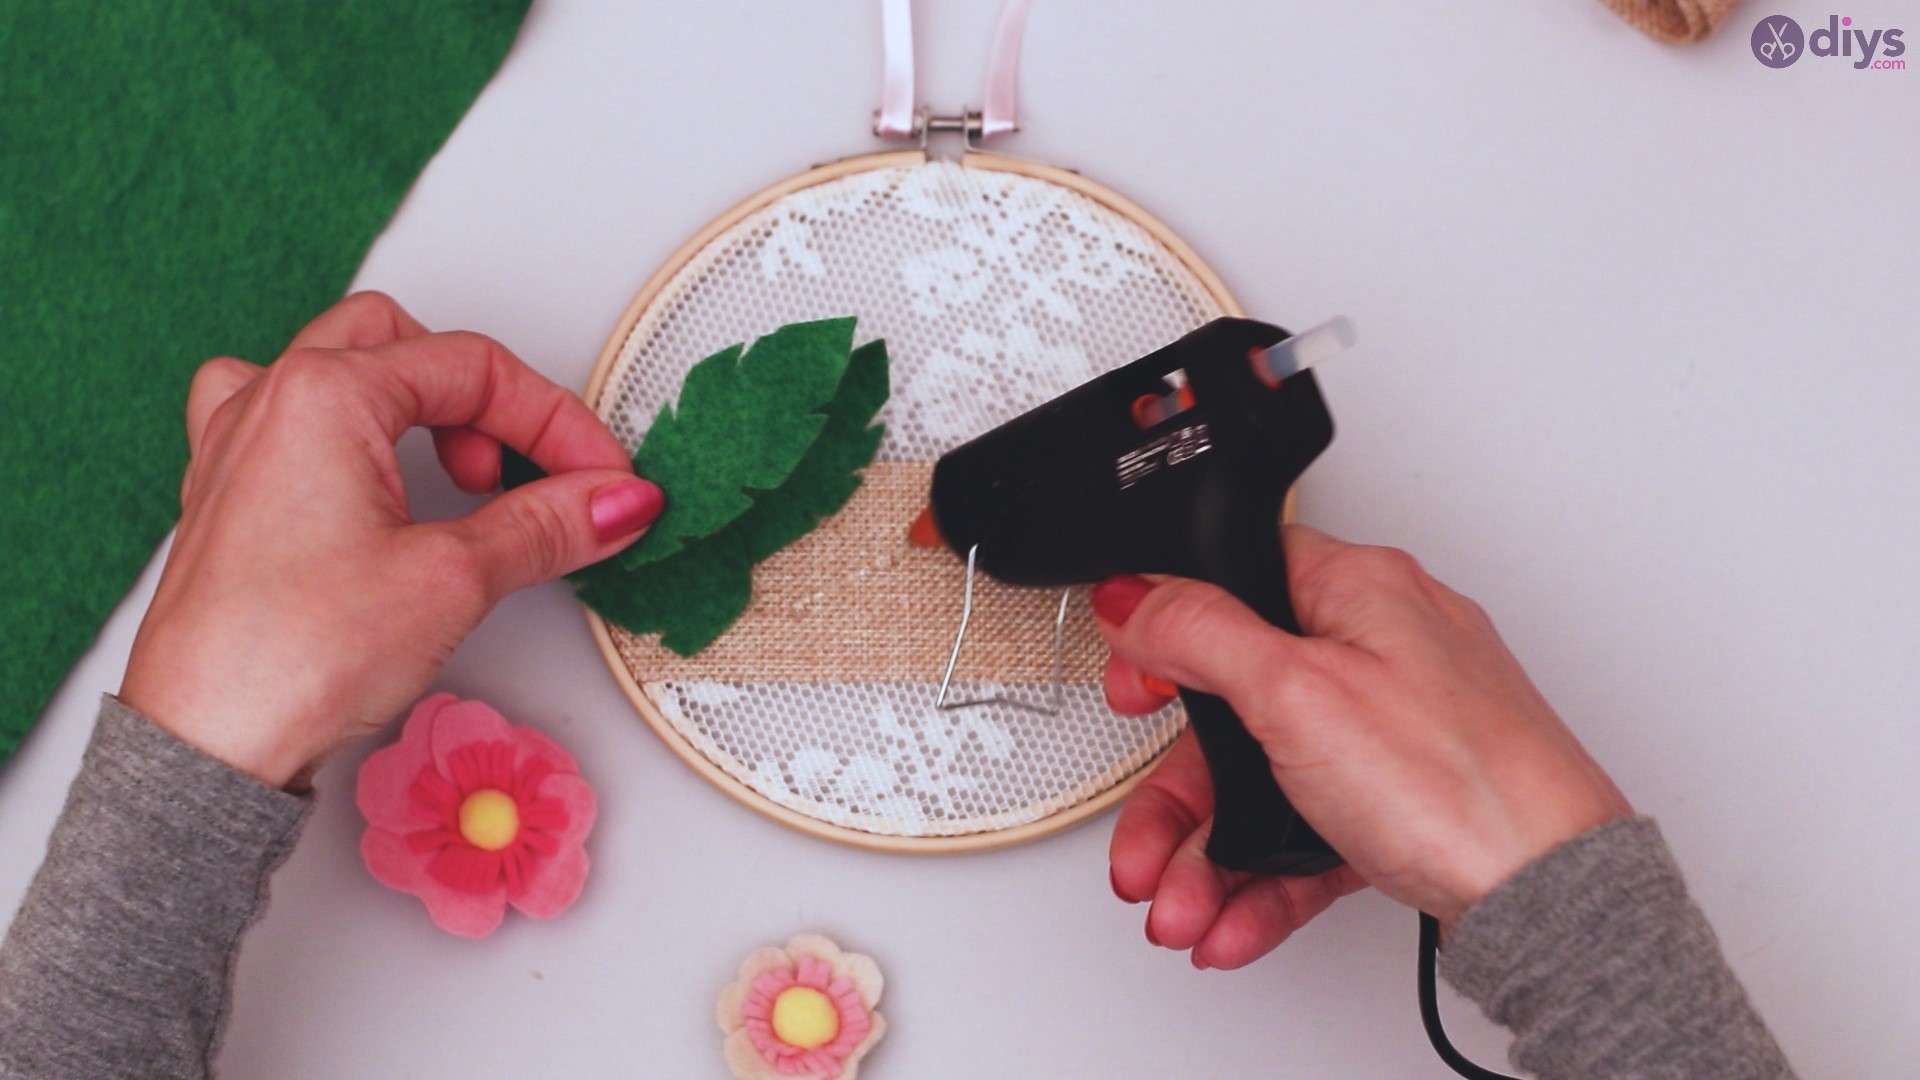 Diy embroidery hoop wall decor tutorial step by step (58)